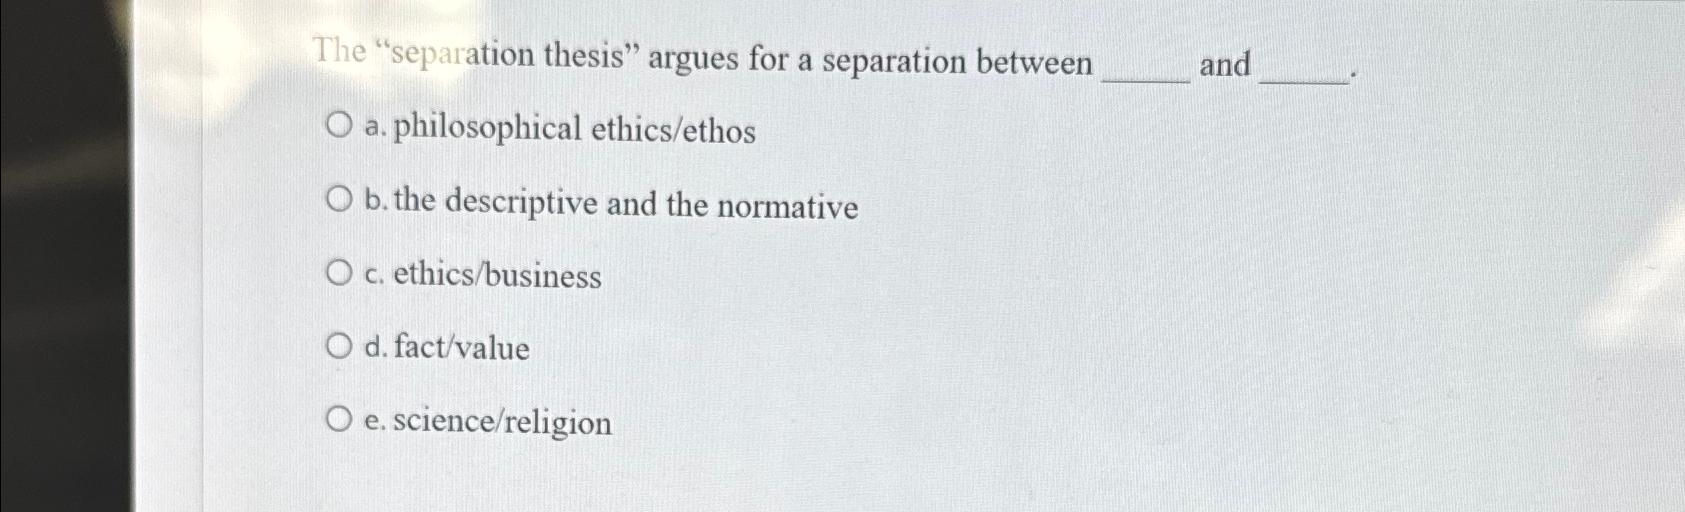 thesis on separation